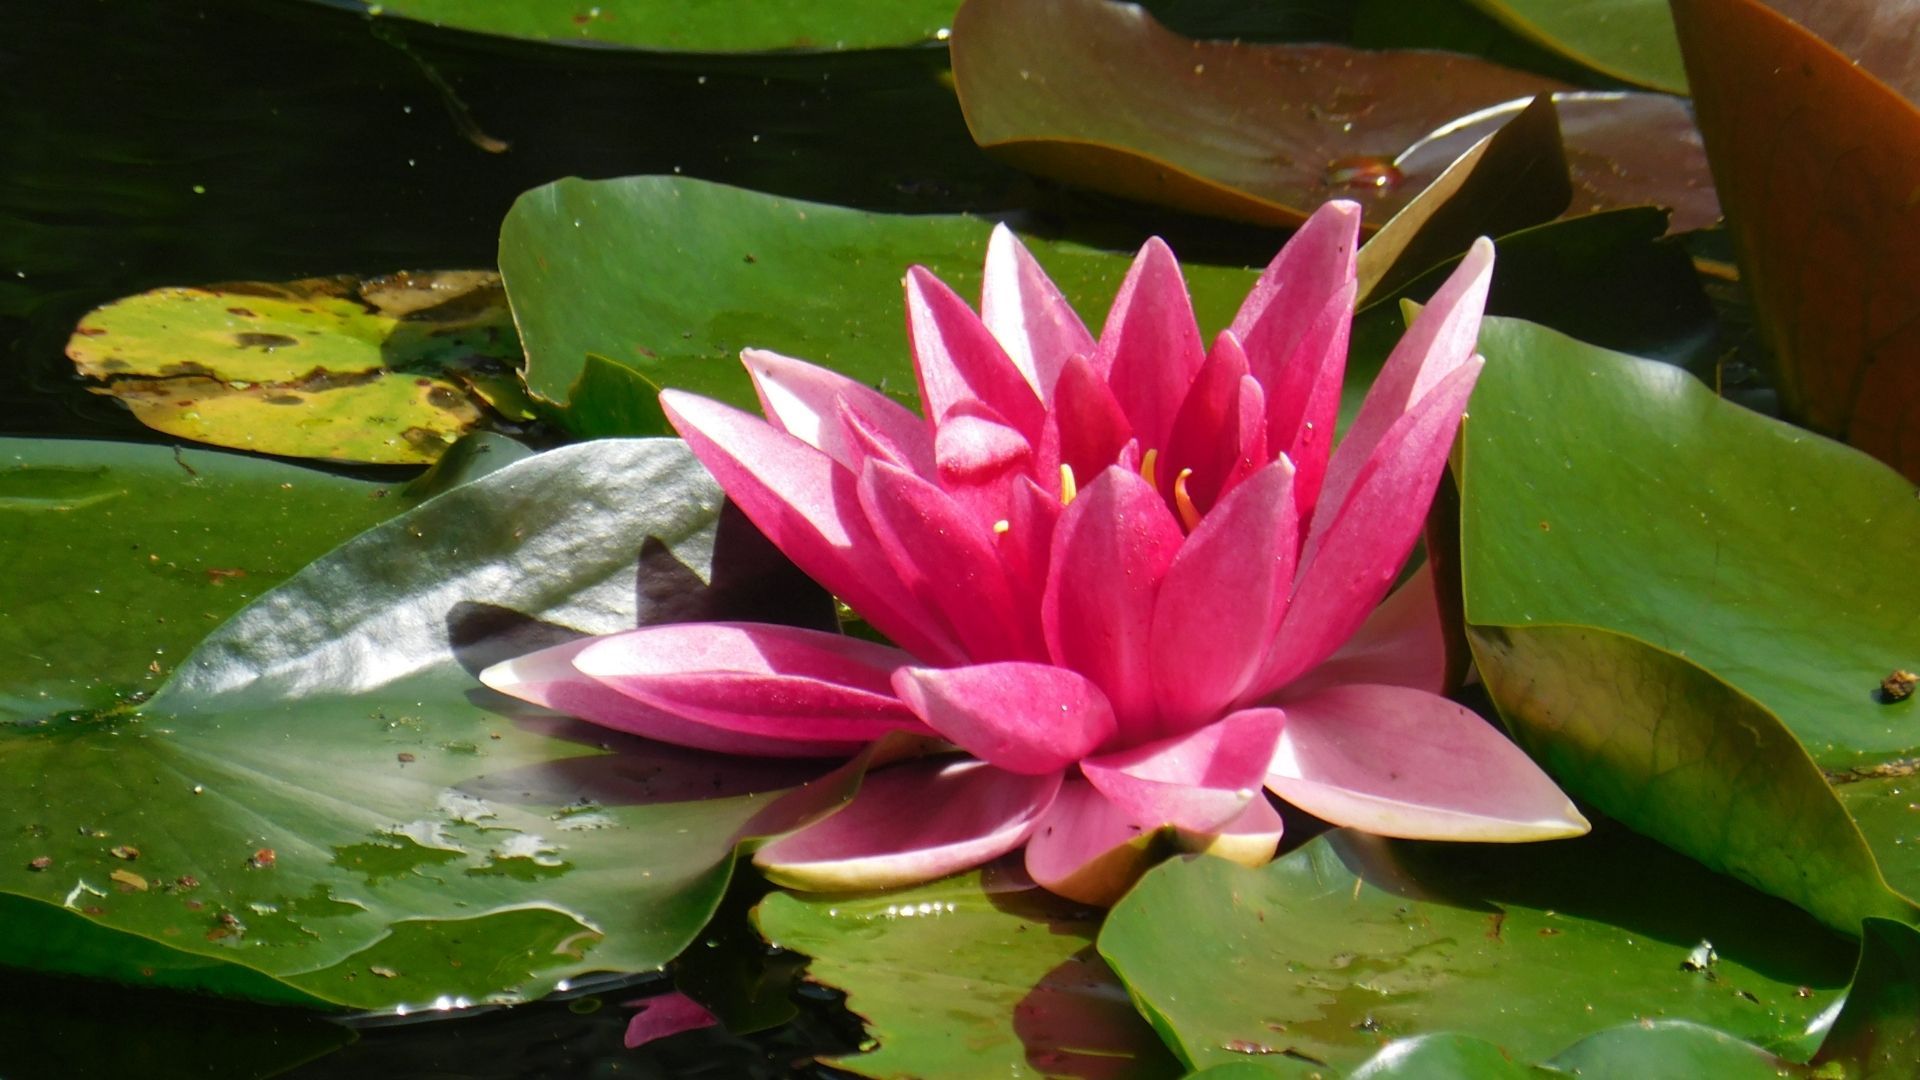 Most beautiful flowers: Water lily